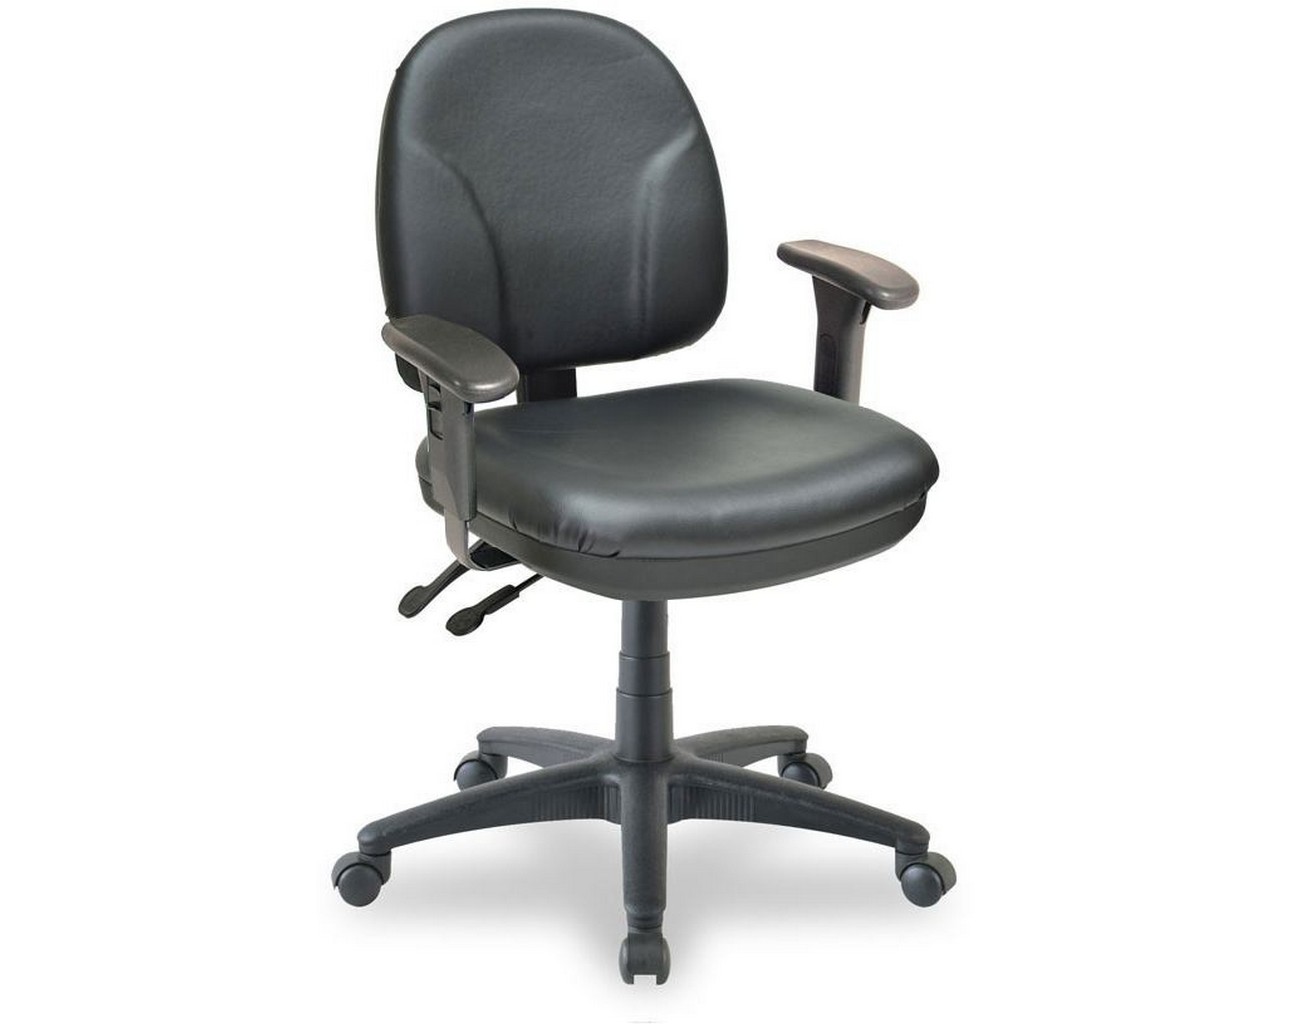 Comformatic Tilt Seat and Back Chair with Arms – Black Antimicrobial Vinyl